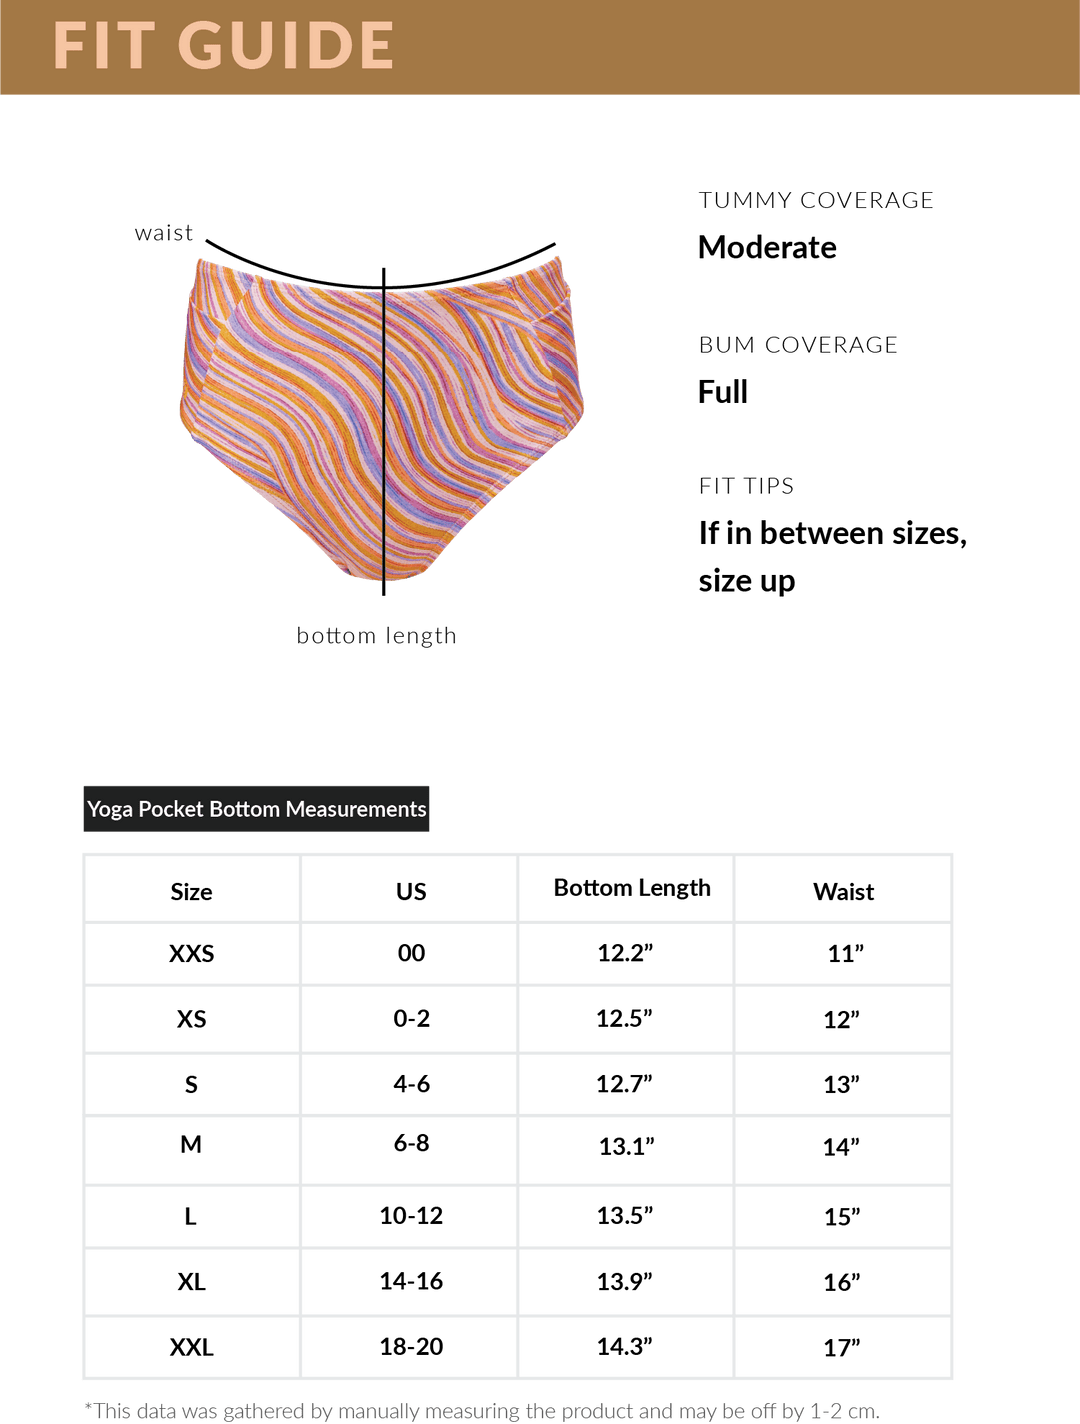 Fit Guide for the Yoga Pocket Bottom